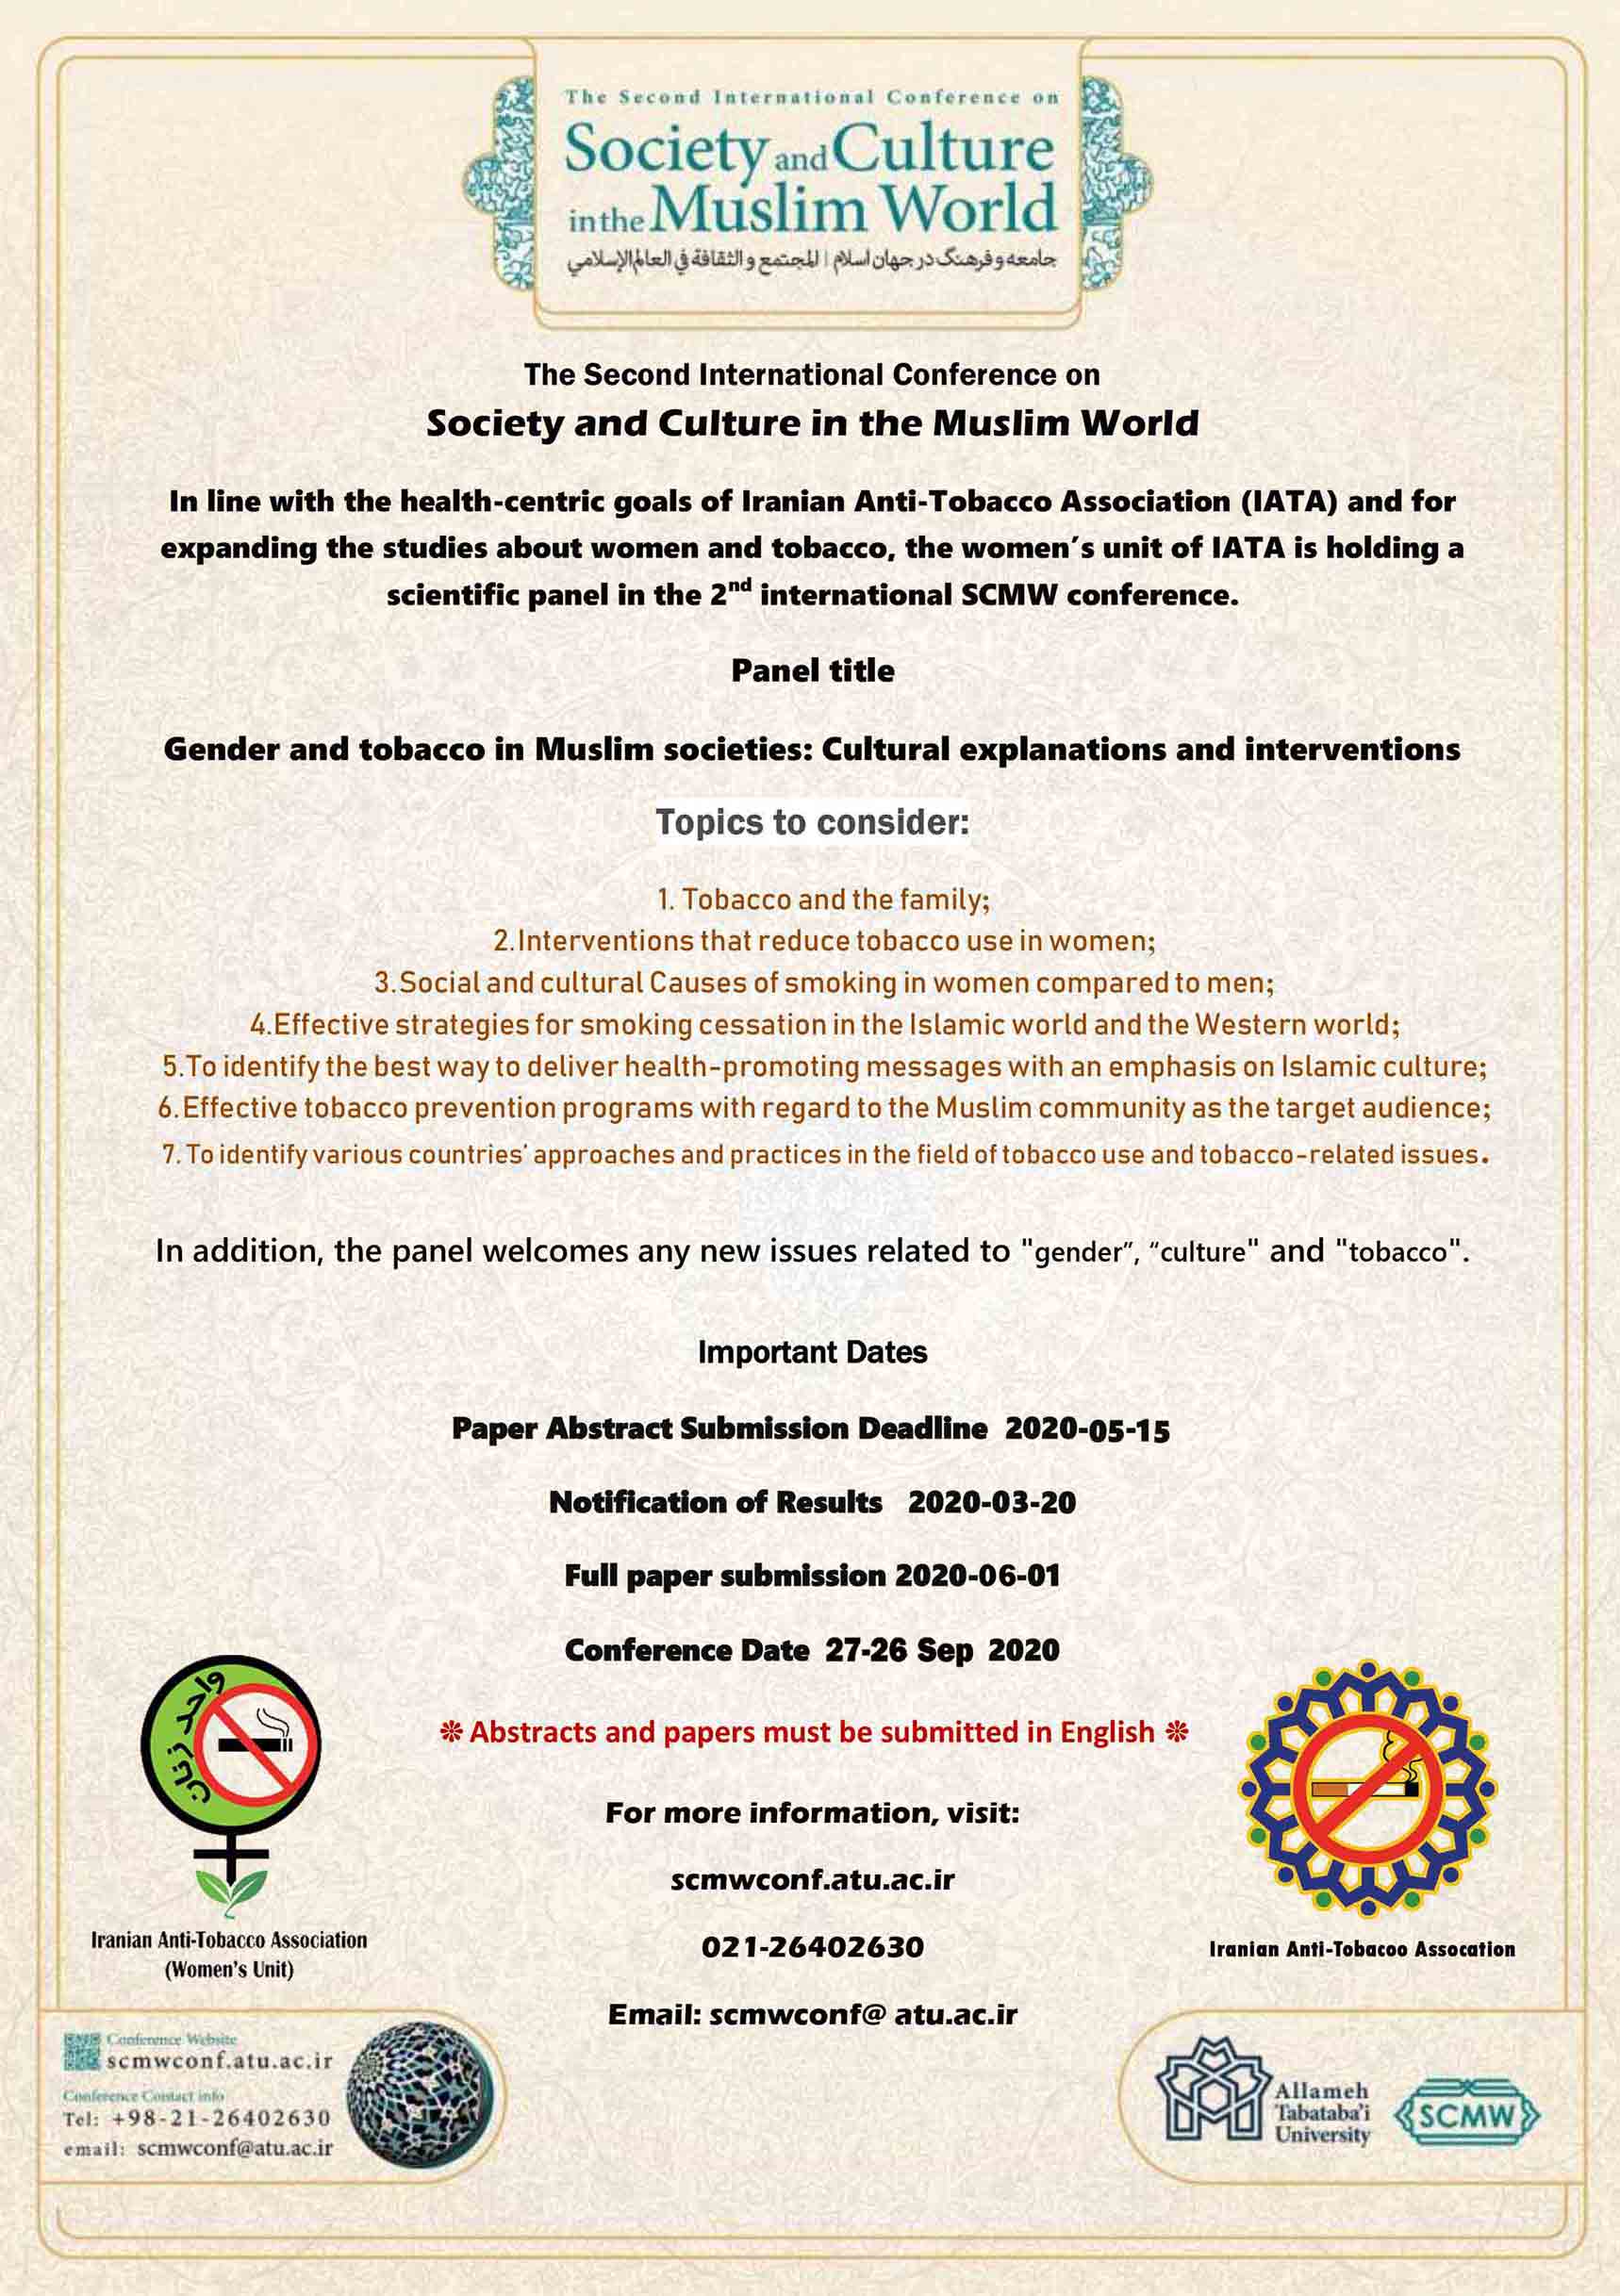 Call for paper - "Gender and tobacco in Muslim societies" panel